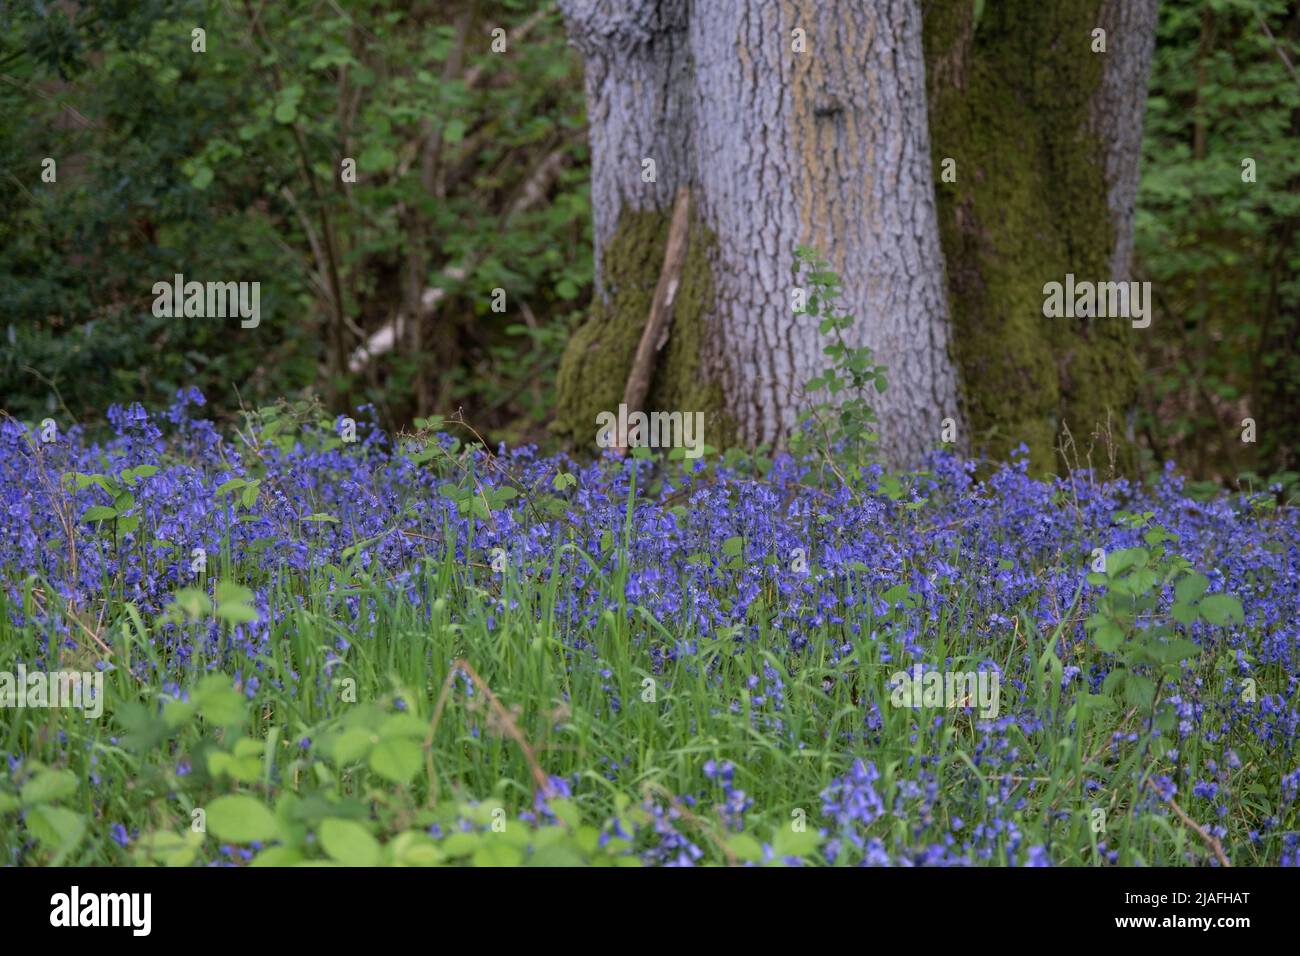 Bluebells in spring woodland on 14th May 2022 in Upper Arley, United Kingdom. Bluebells or H. non-scripta is particularly associated with ancient woodland where it may dominate the woodland floor to produce carpets of violet–blue flowers in bluebell woods, but also occurs in more open habitats in western regions. It is protected under UK law. Bannams Wood is a small piece of ancient woodland, part of the original Wildwood which coverered the UK many thousands of years ago. British wildwood, or simply the wildwood, is the wholly natural landscape which developed across major parts of England af Stock Photo